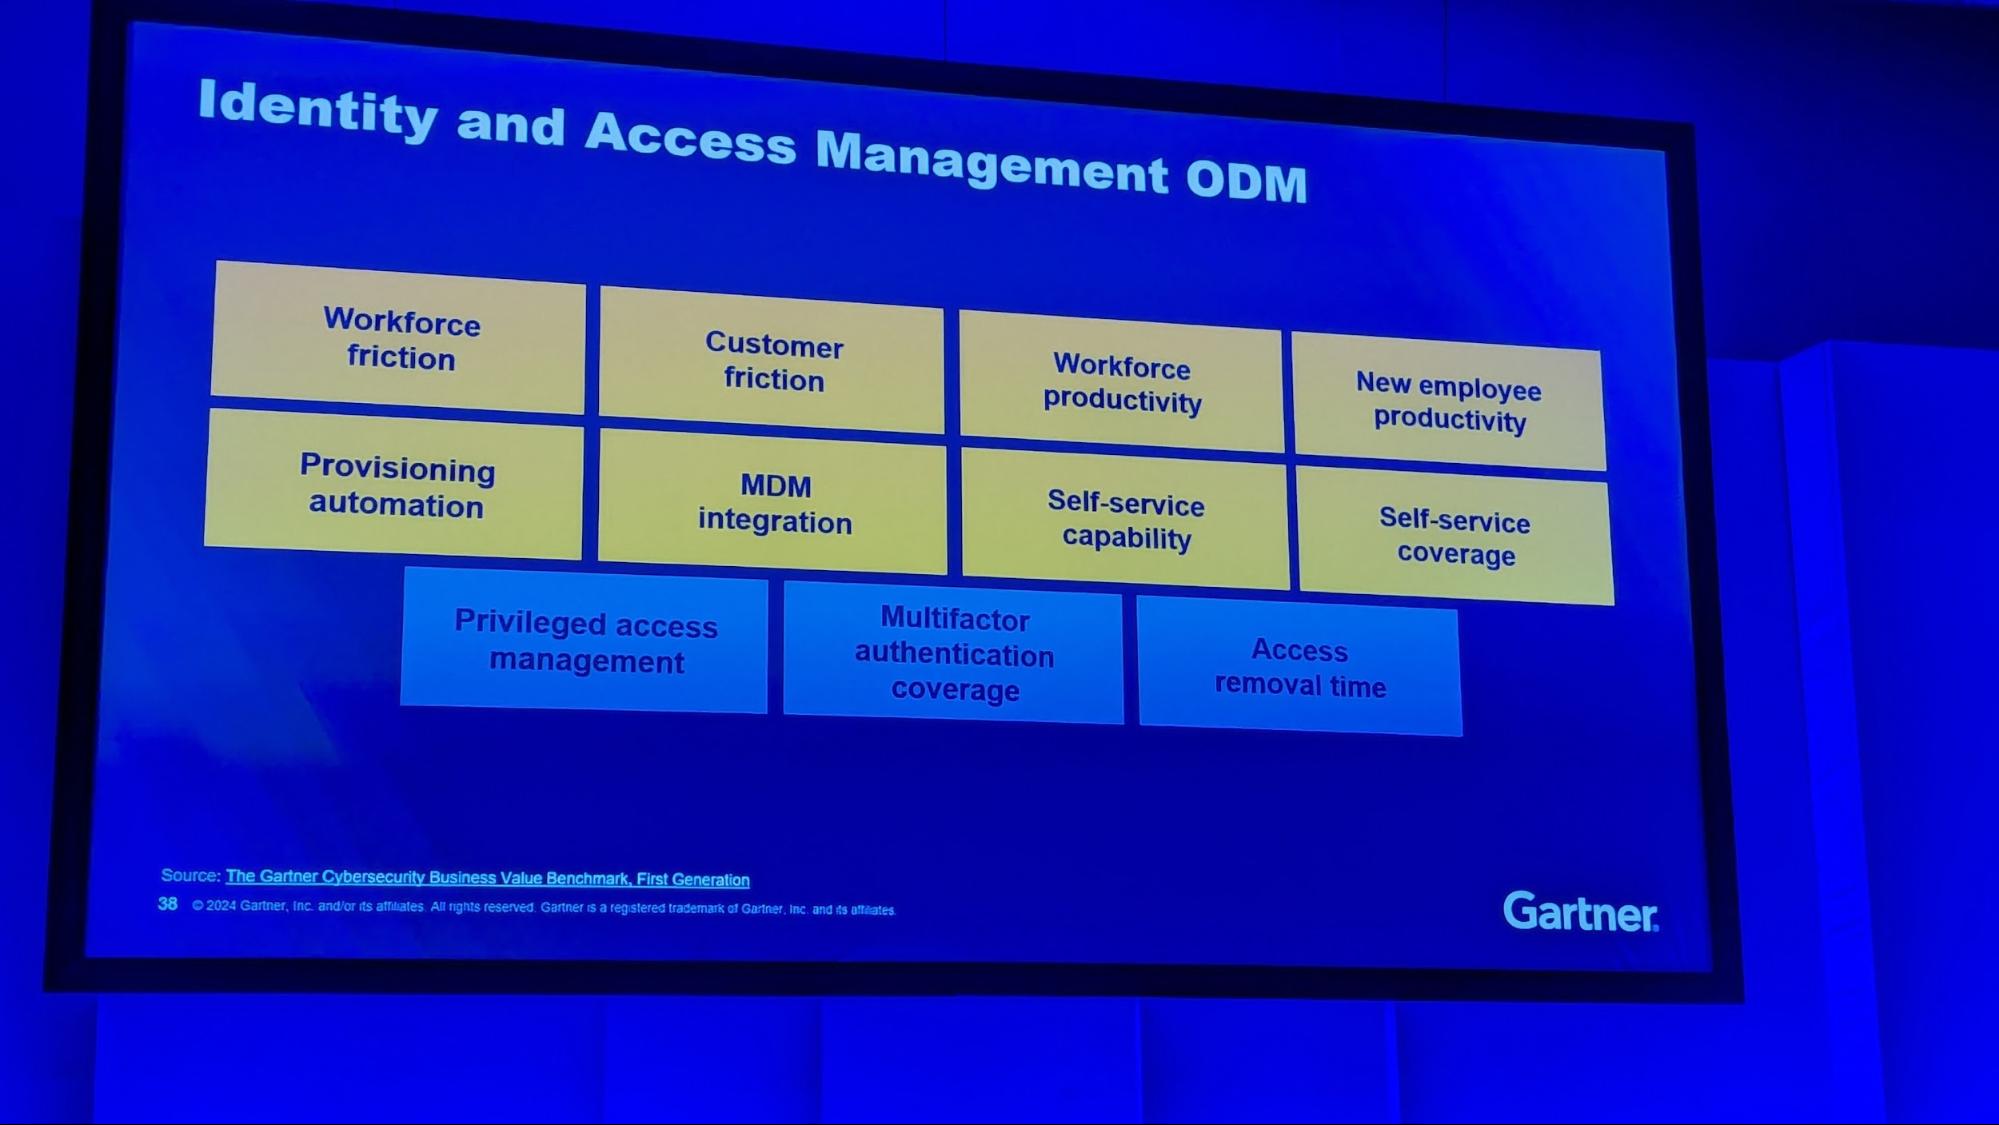 Identity and Access Management ODM slide from event